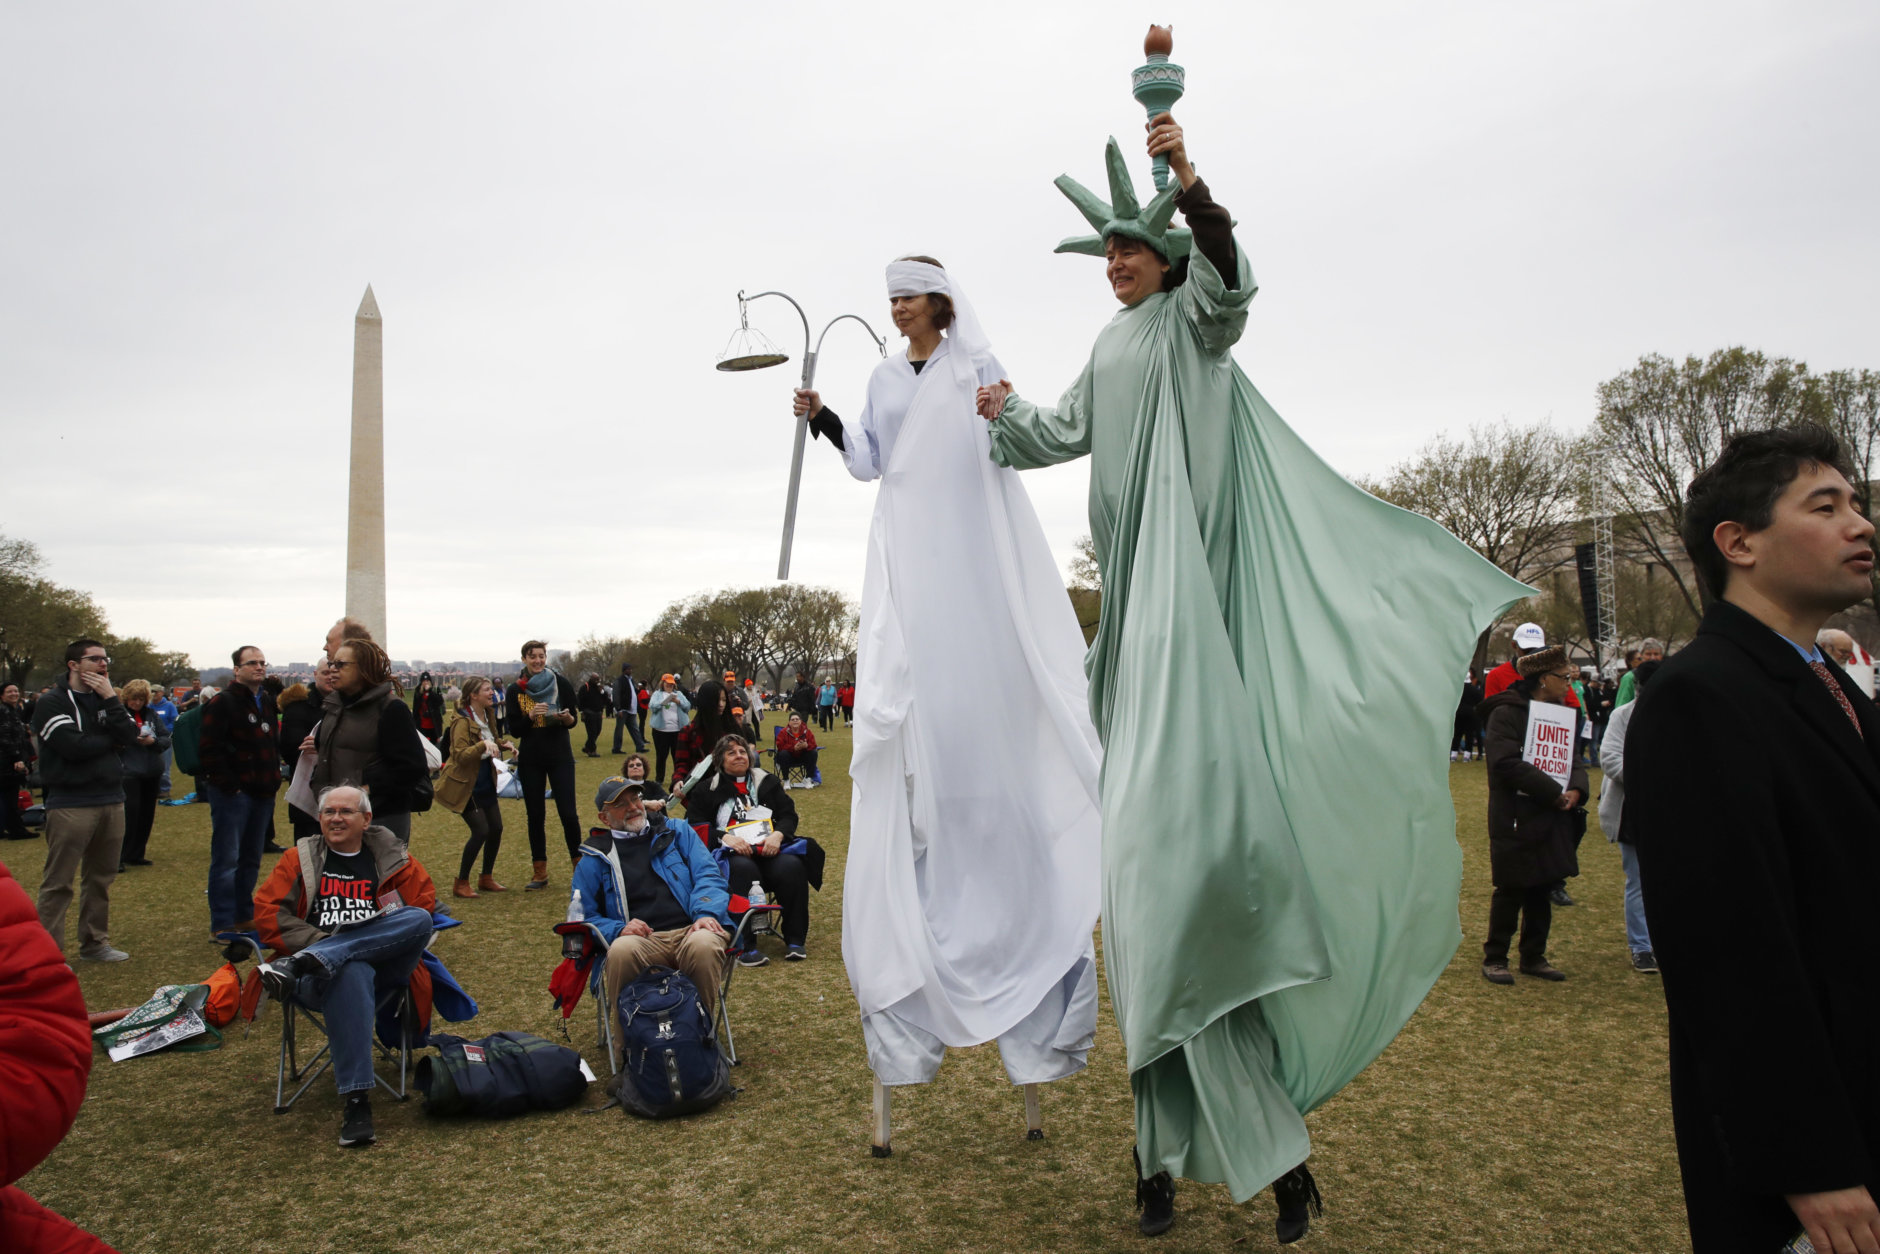 Carolyn McCarthy, dressed on stilts as "Lady Justice," left, and Debbie Davis, dressed as "Lady Liberty," both of Milwaukee, Wisc., attend the A.C.T. To End Racism rally, Wednesday, April 4, 2018, on the National Mall in Washington, on the 50th anniversary of Martin Luther King Jr.'s assassination. (AP Photo/Jacquelyn Martin)